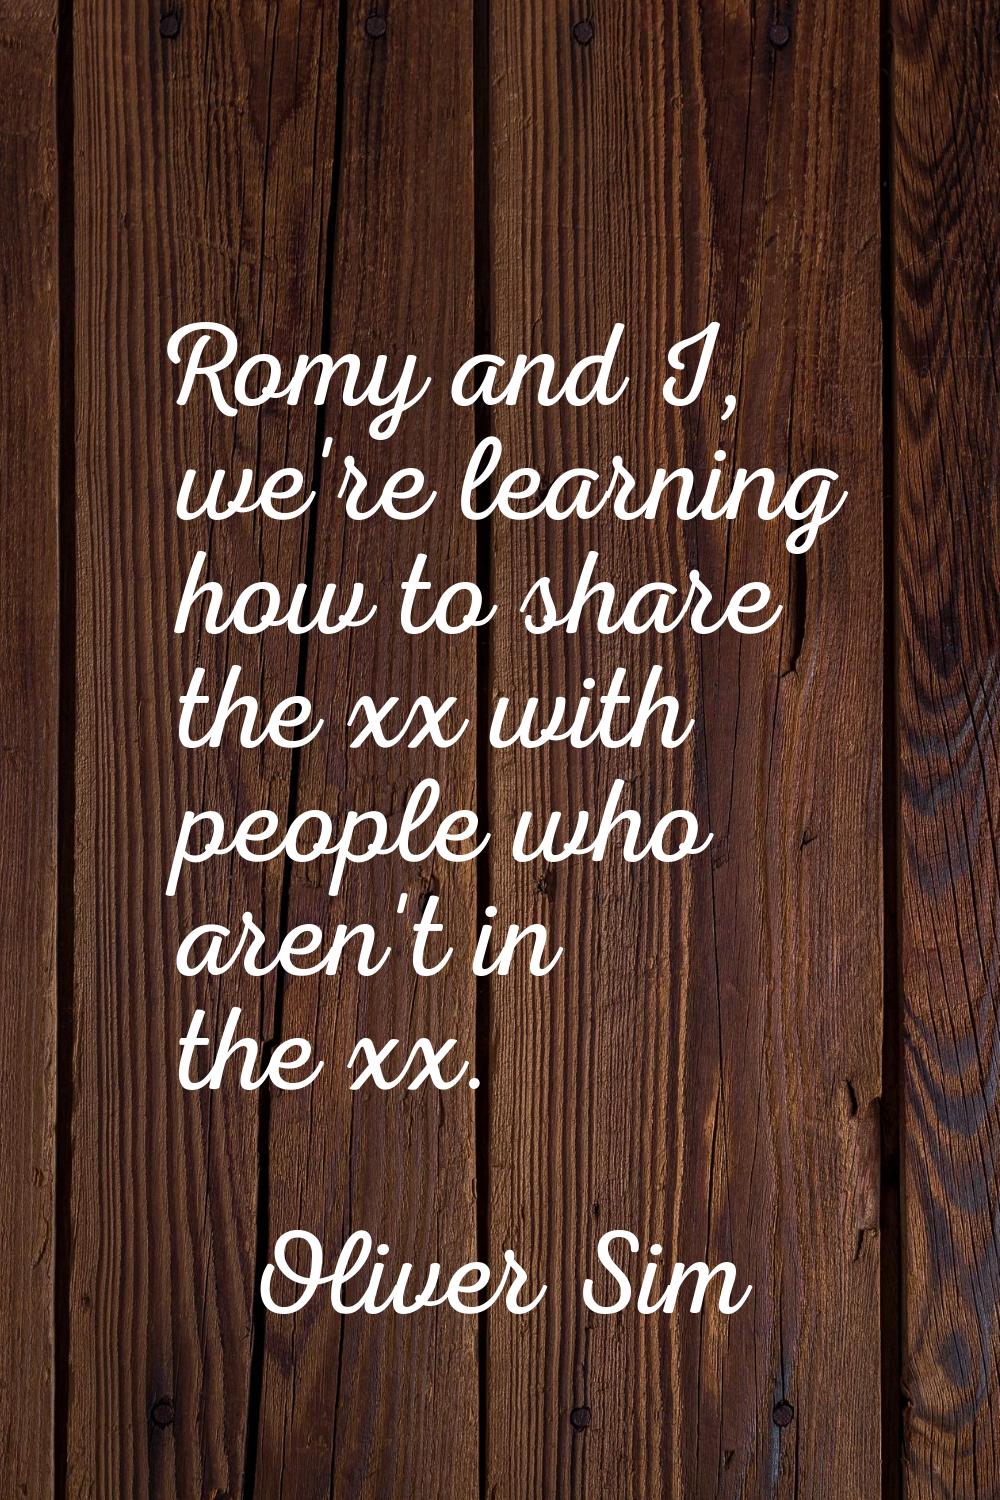 Romy and I, we're learning how to share the xx with people who aren't in the xx.